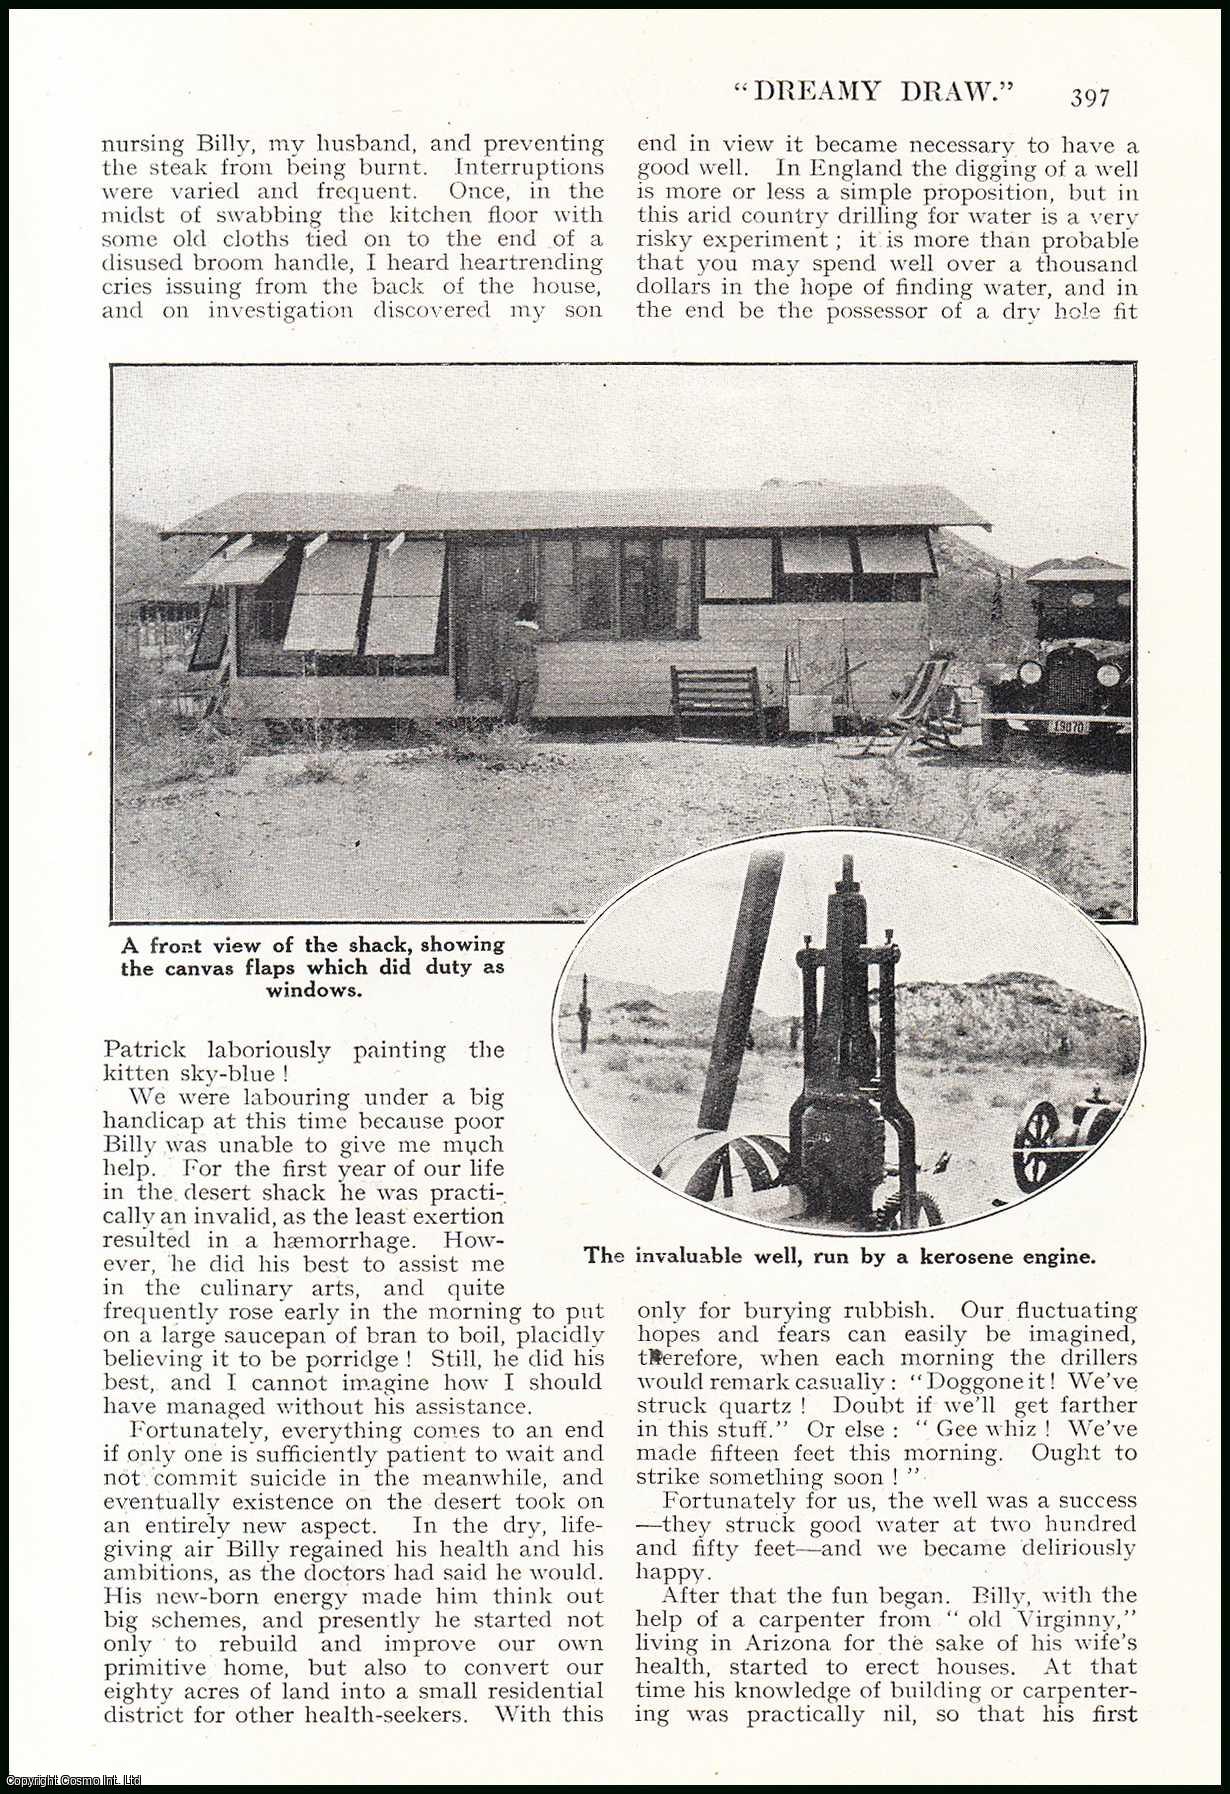 Norah Hammersley Laing - Dreamy Draw : house-keeping in a rough shack, in the desert in Arizona. An uncommon original article from the Wide World Magazine, 1924.